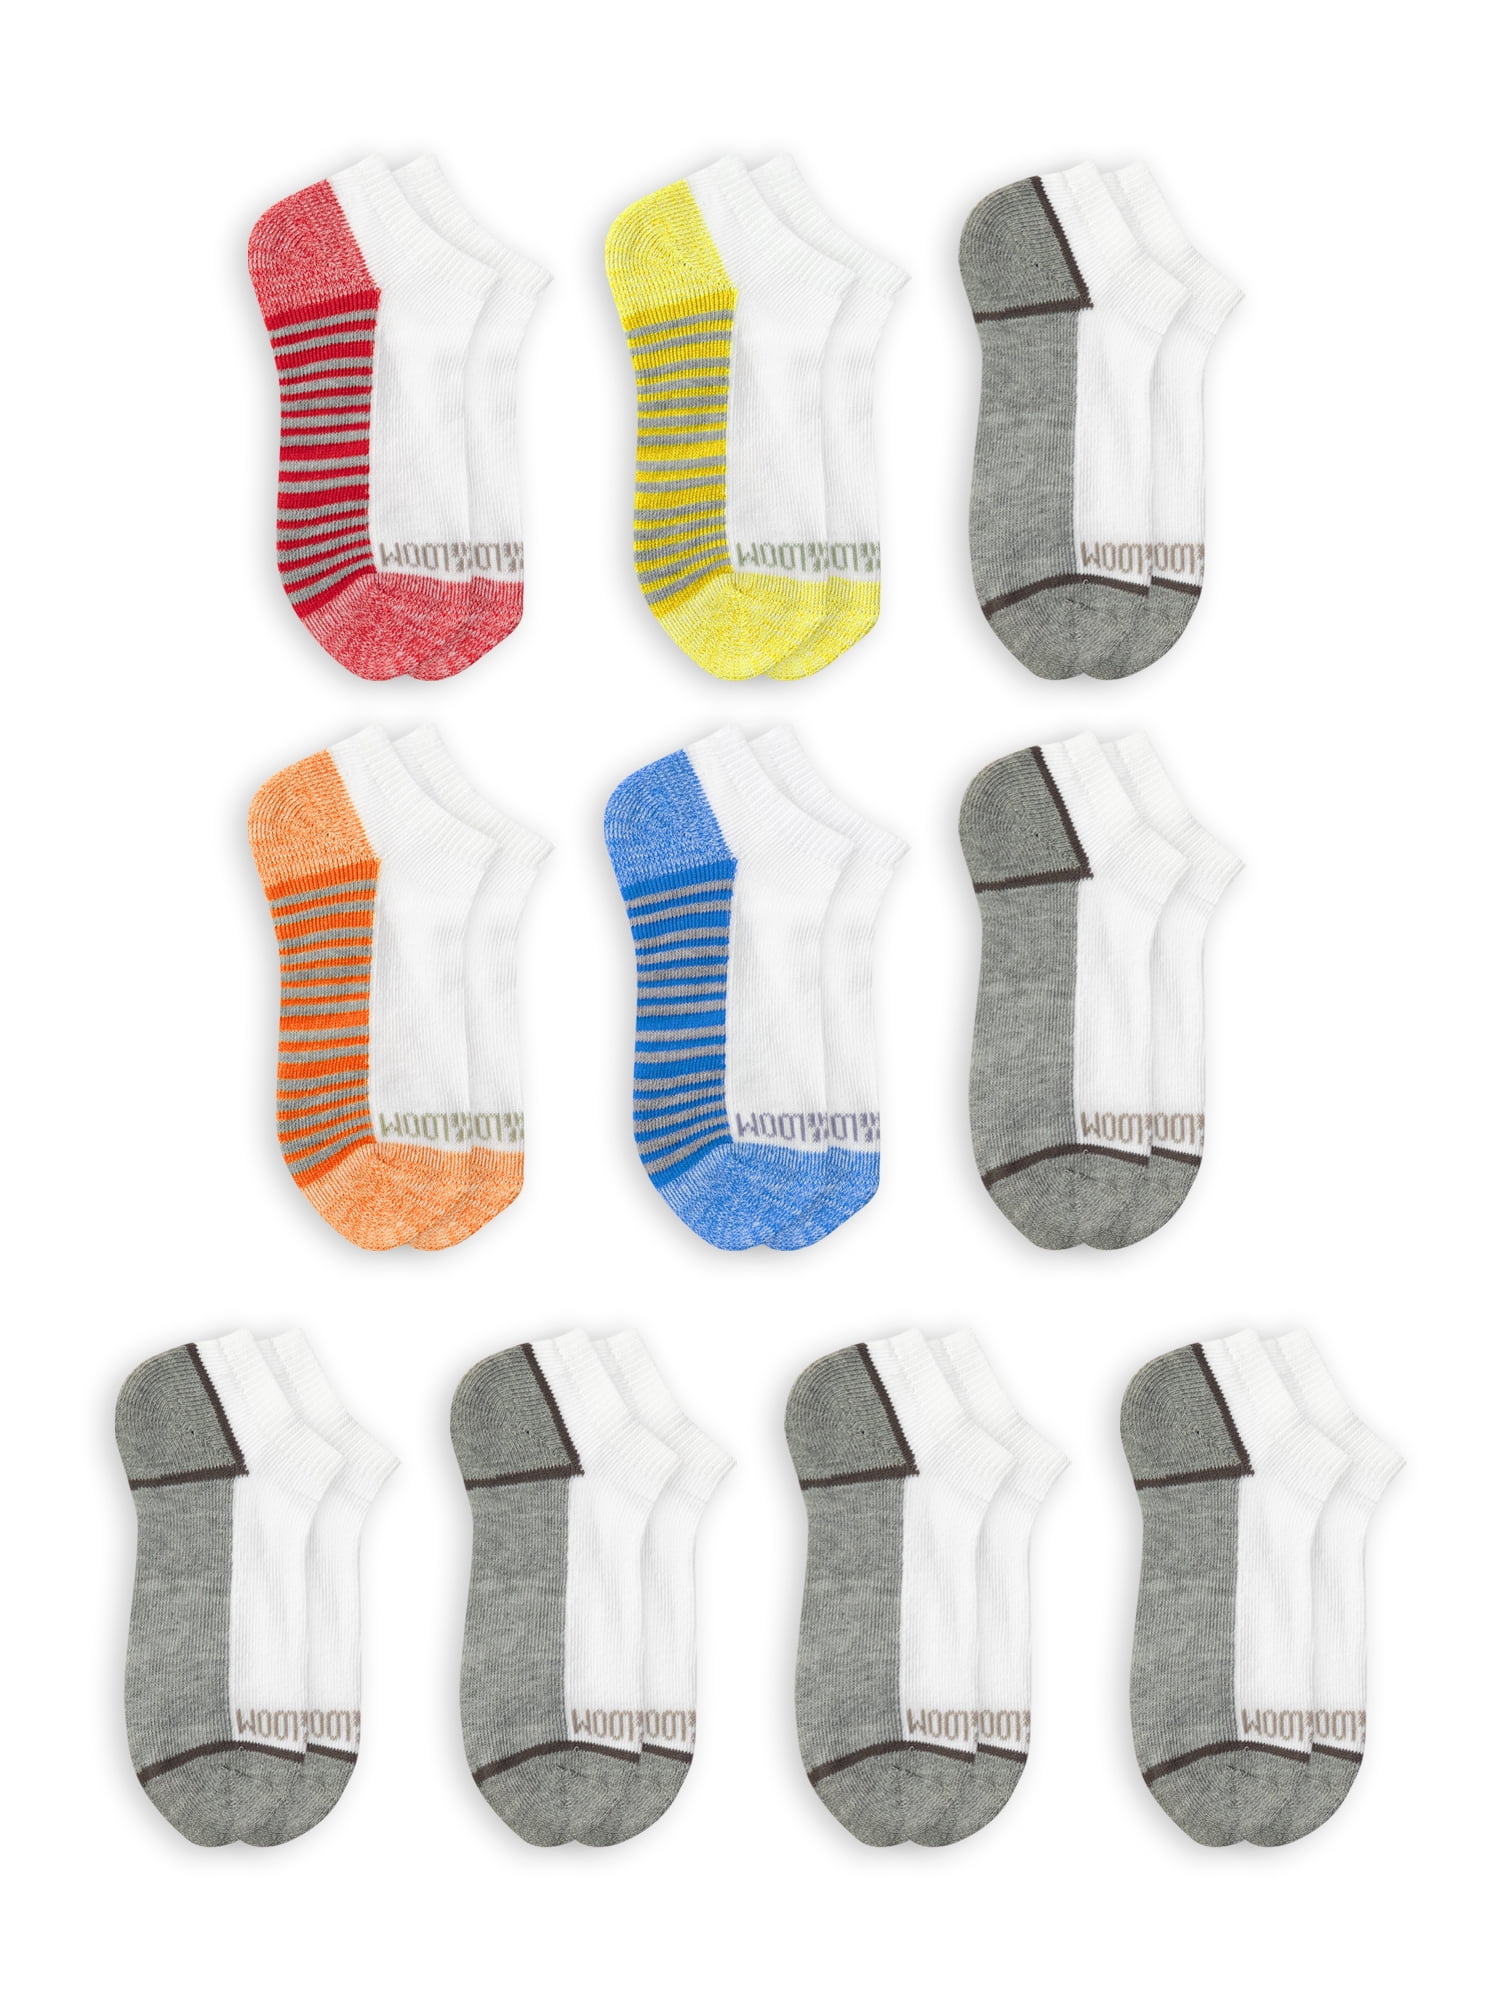 Hanes Boys Extreme Value 20 Pack No Show Socks, Size S-L 